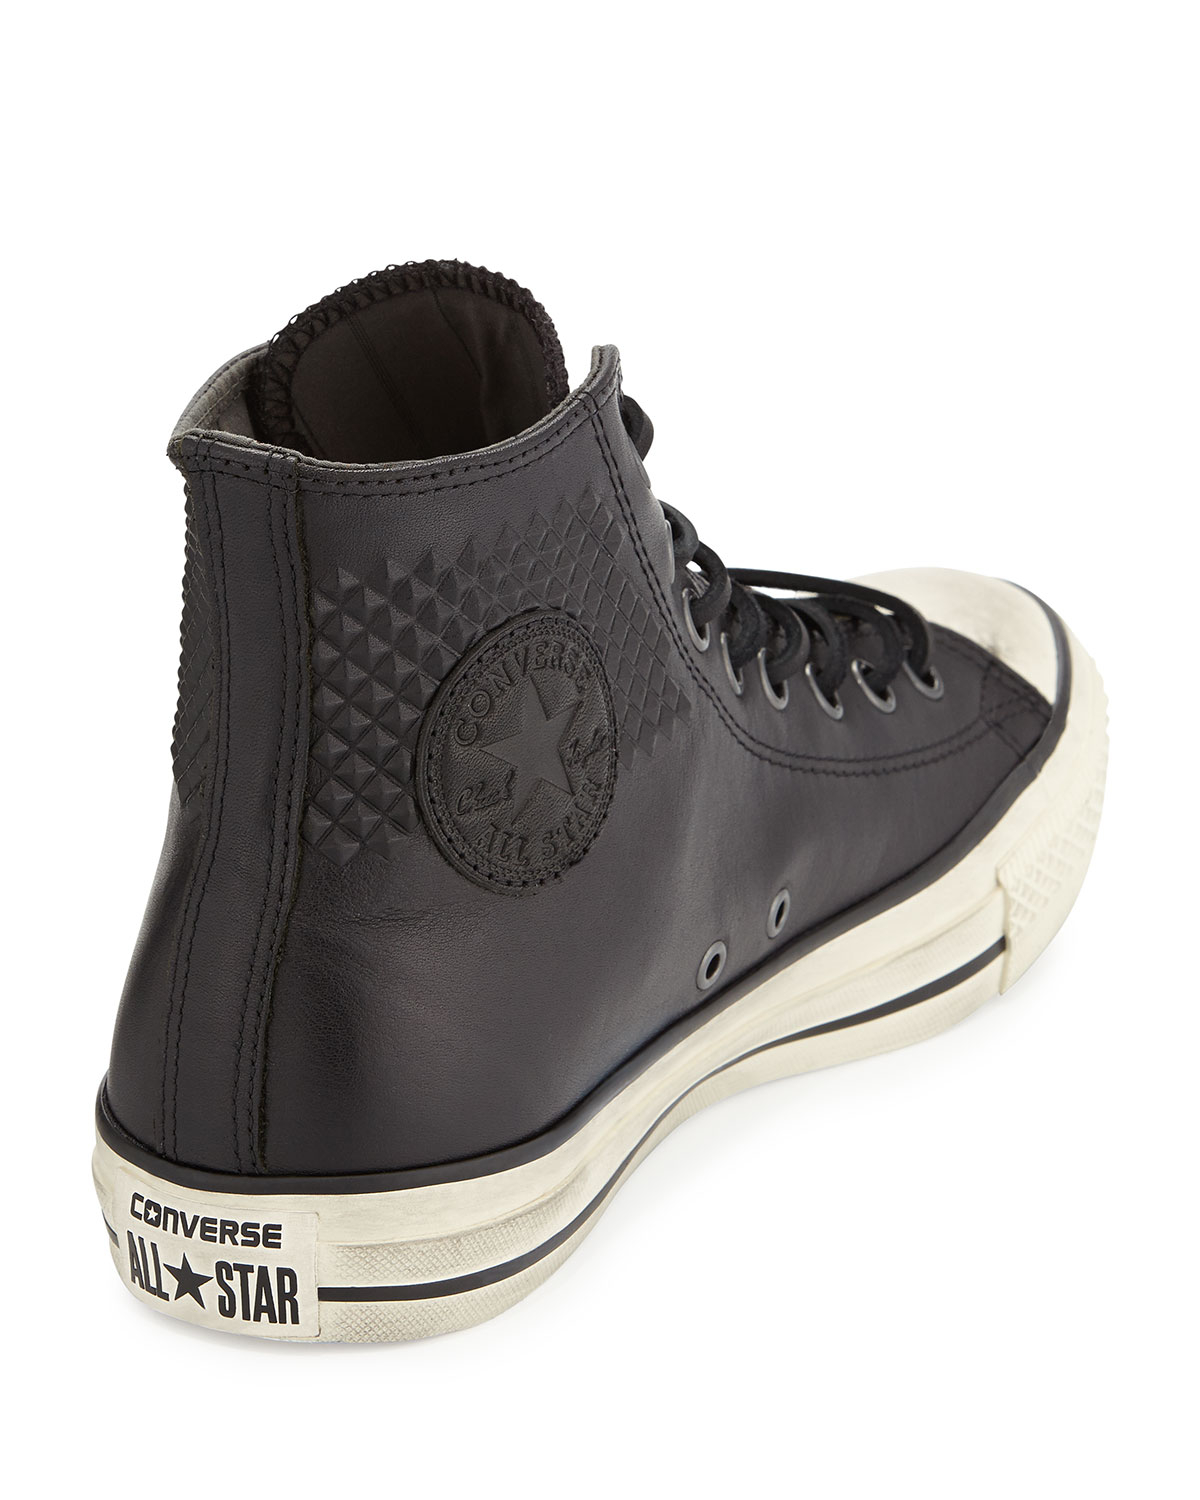 Converse John Varvatos Studded Leather High-top Sneaker in ...